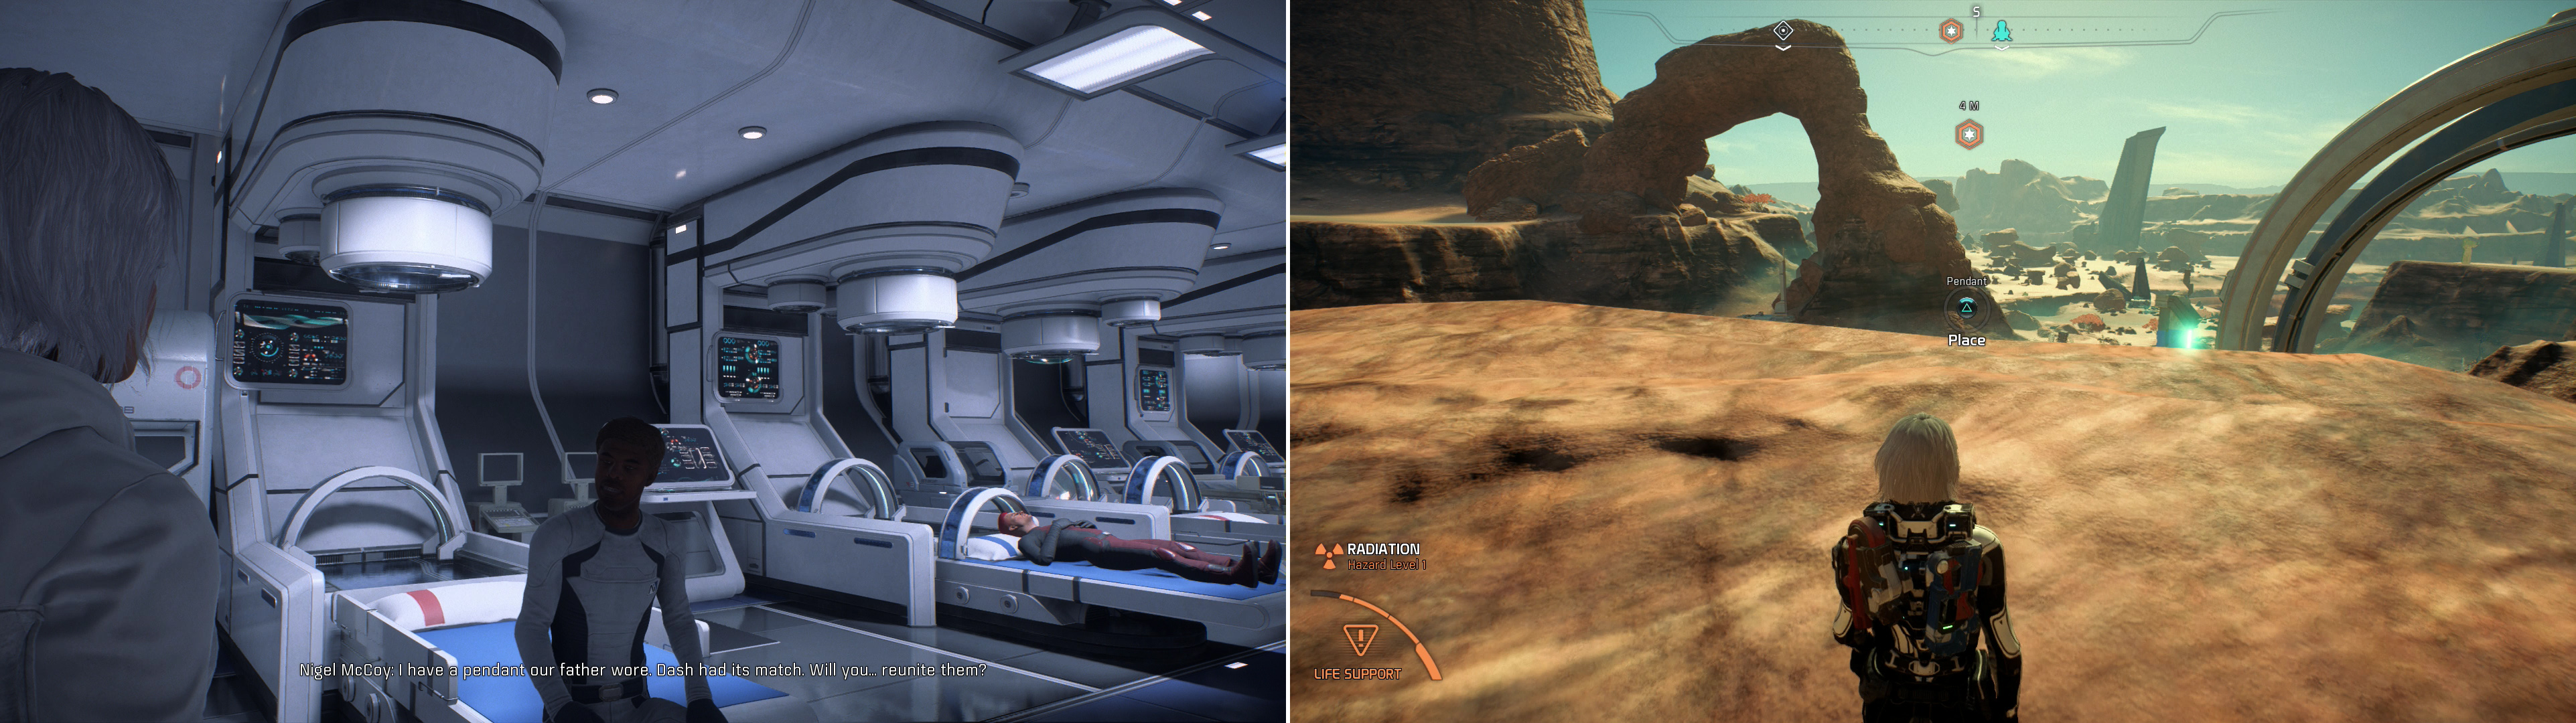 Talk to Nigel McCoy on the Hyperion (left) then fulfill his wishes and reuinite his pendant with his brother’s on a hill overlooking Site 1 (right).